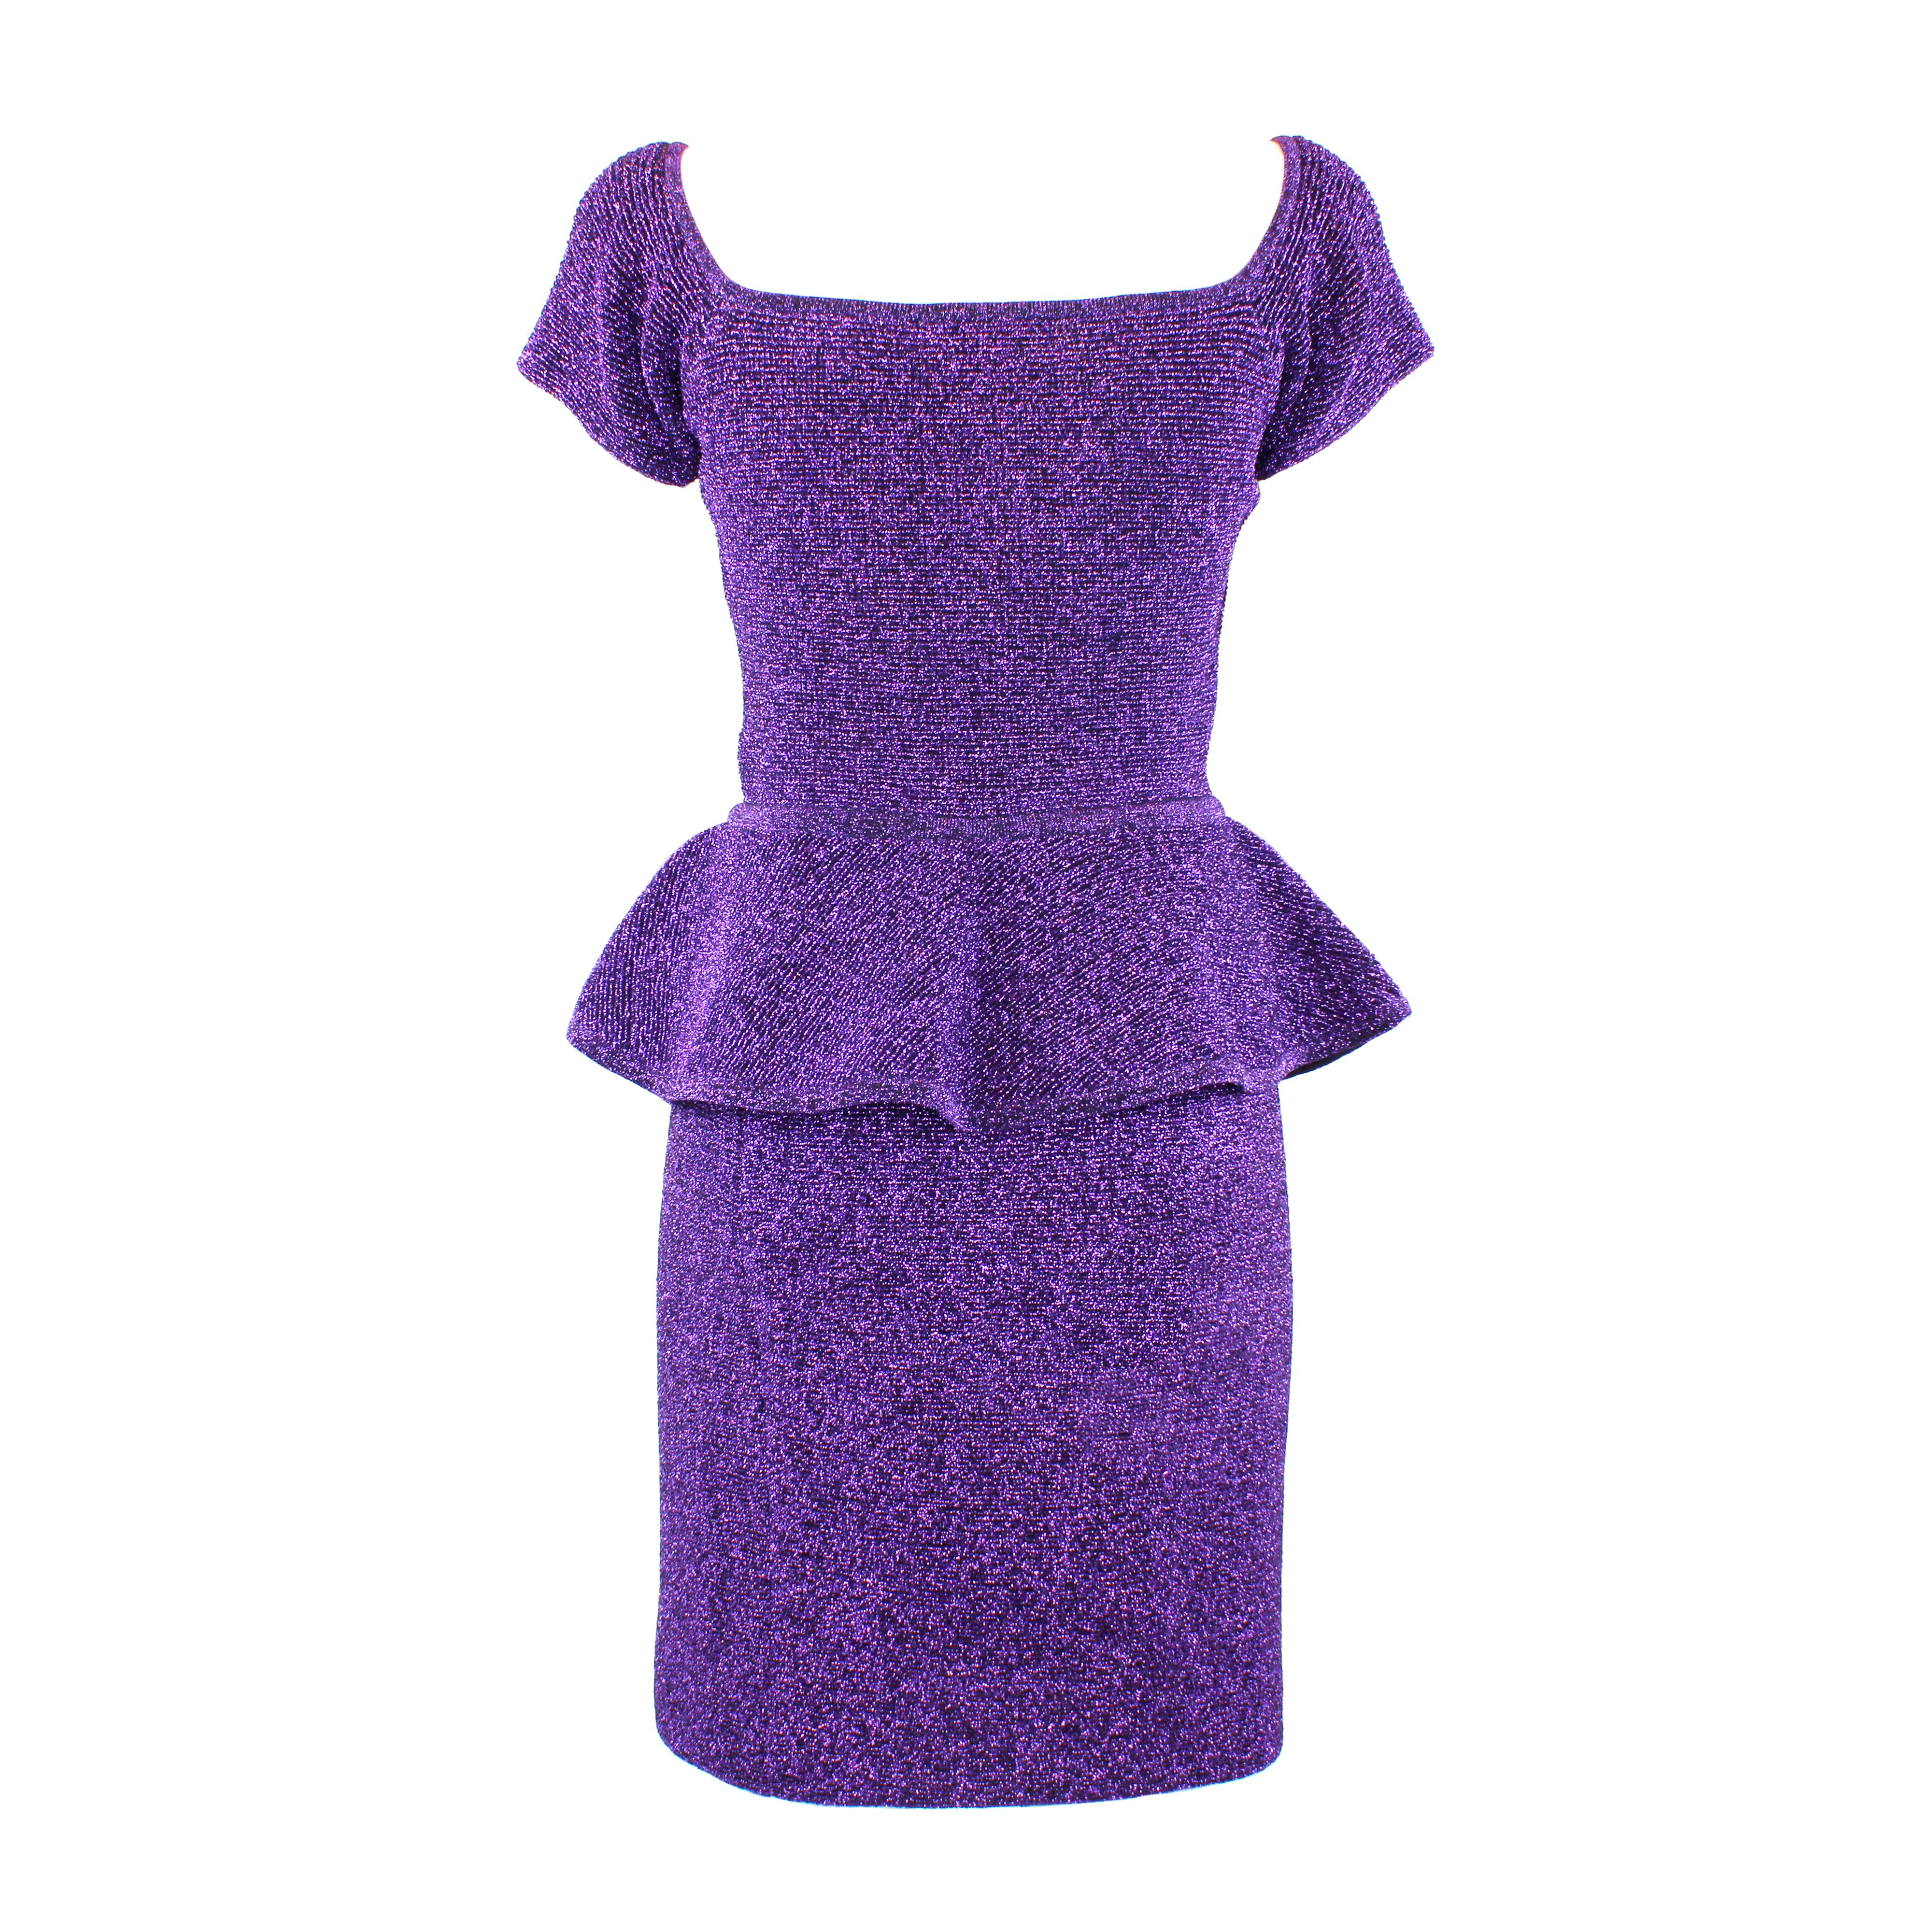 Rare vintage Christian Dior Boutique elasticated tailleur (top and skirt), glitter effect, color purple, size 36 FR.